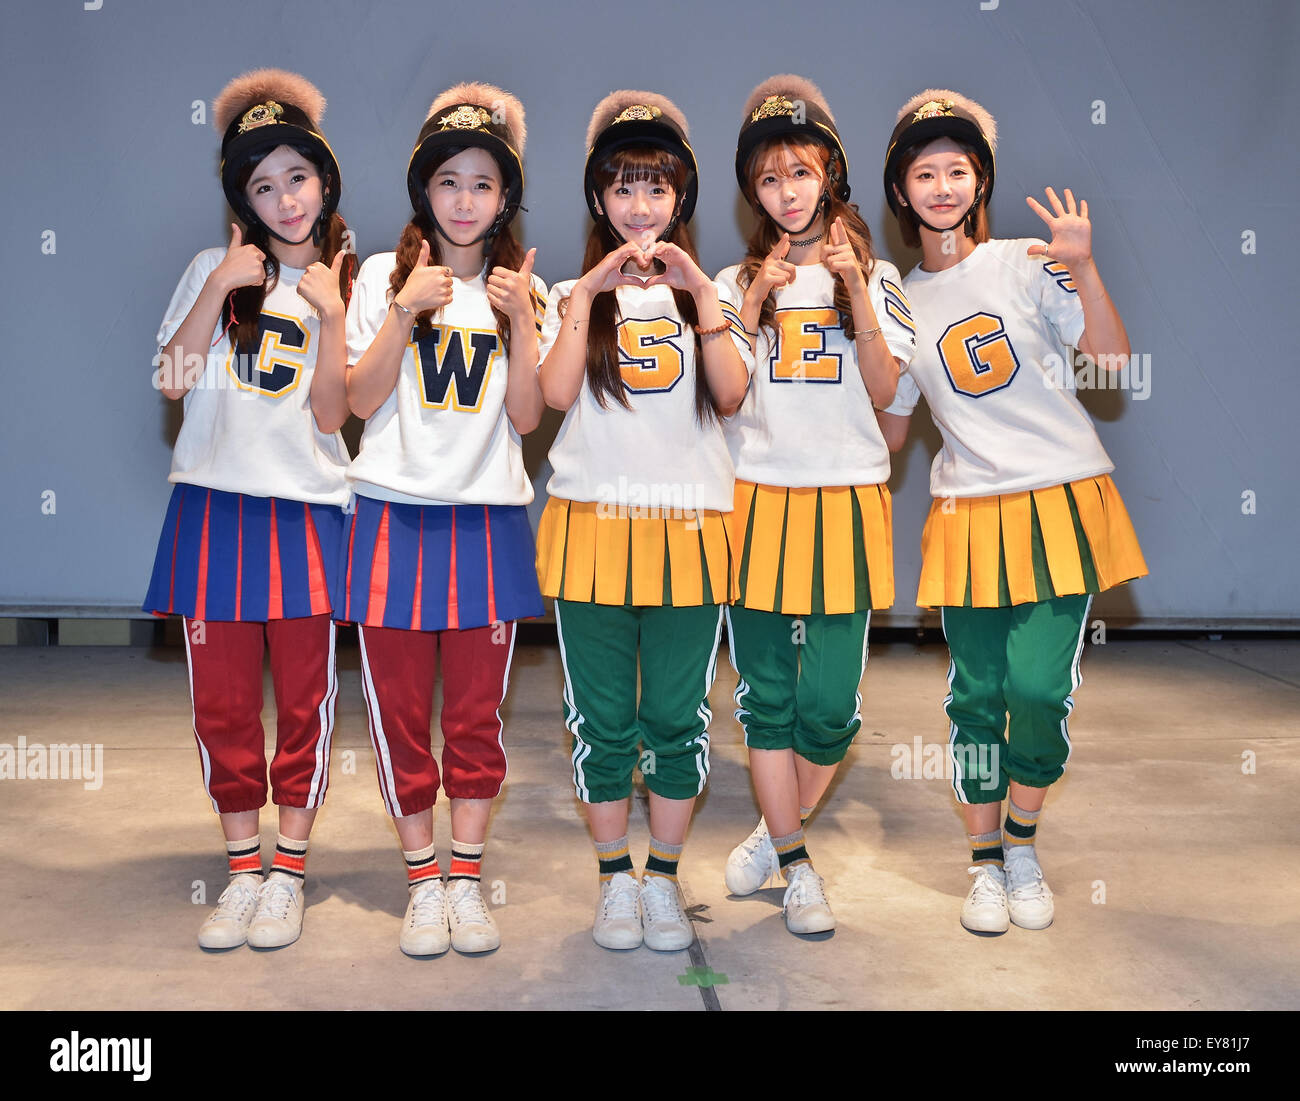 CRAYON POP, Jul 22, 2015 : Kawasaki, Japan : Korean girl group Crayon Pop  (L-R, Choa, Way, Soyul, Ellin, and Geummi) pose for camera during the  promotion event for their new single